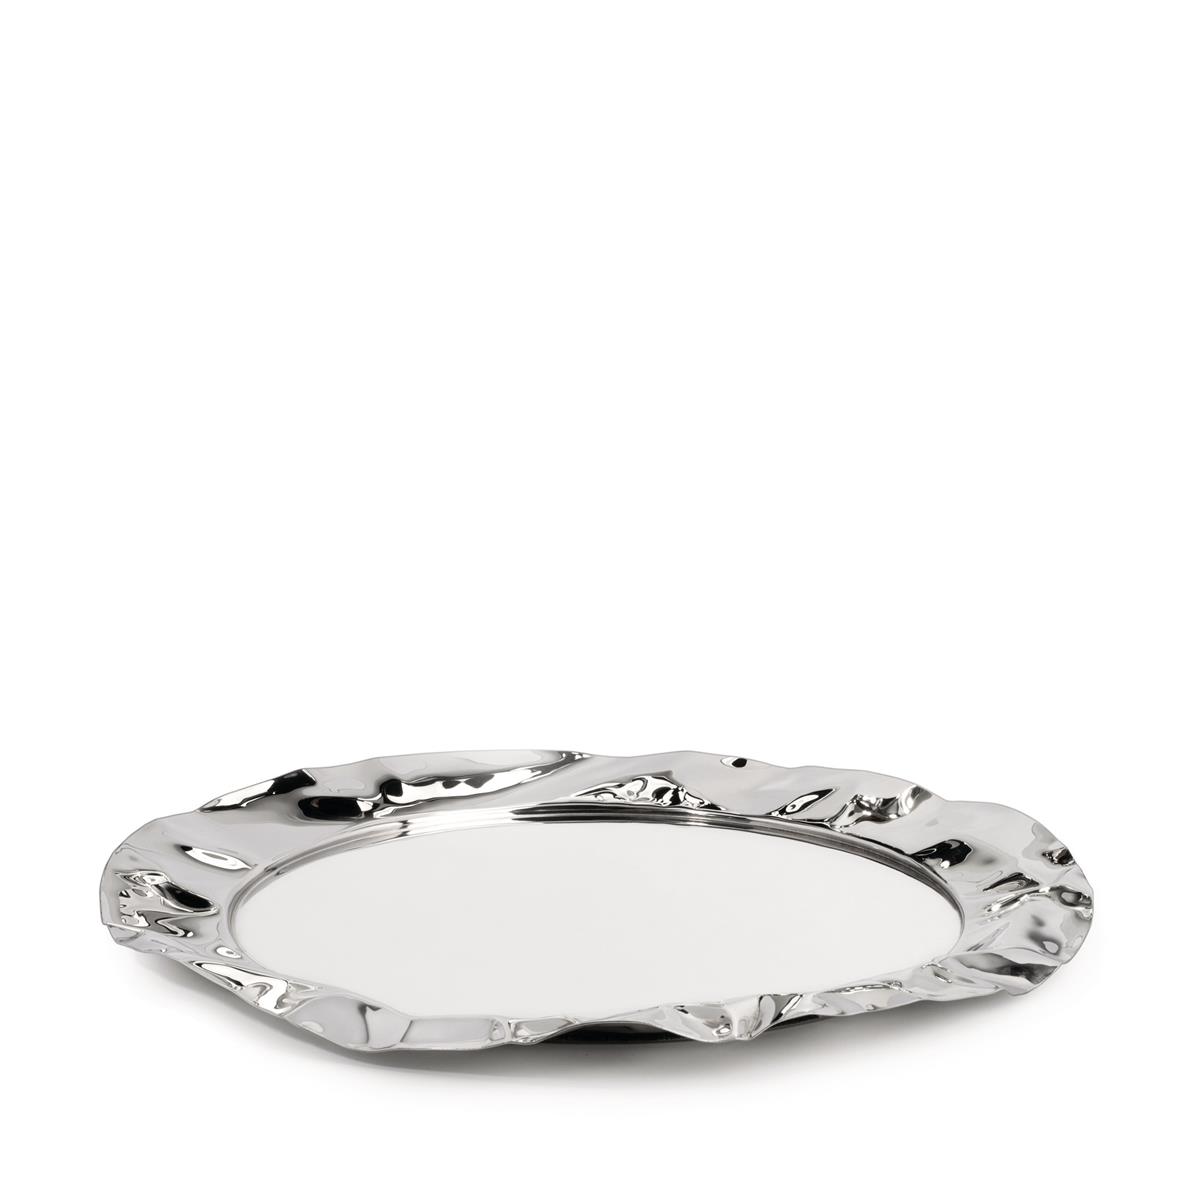 Alessi-Round tray in steel colored with epoxy resin, black